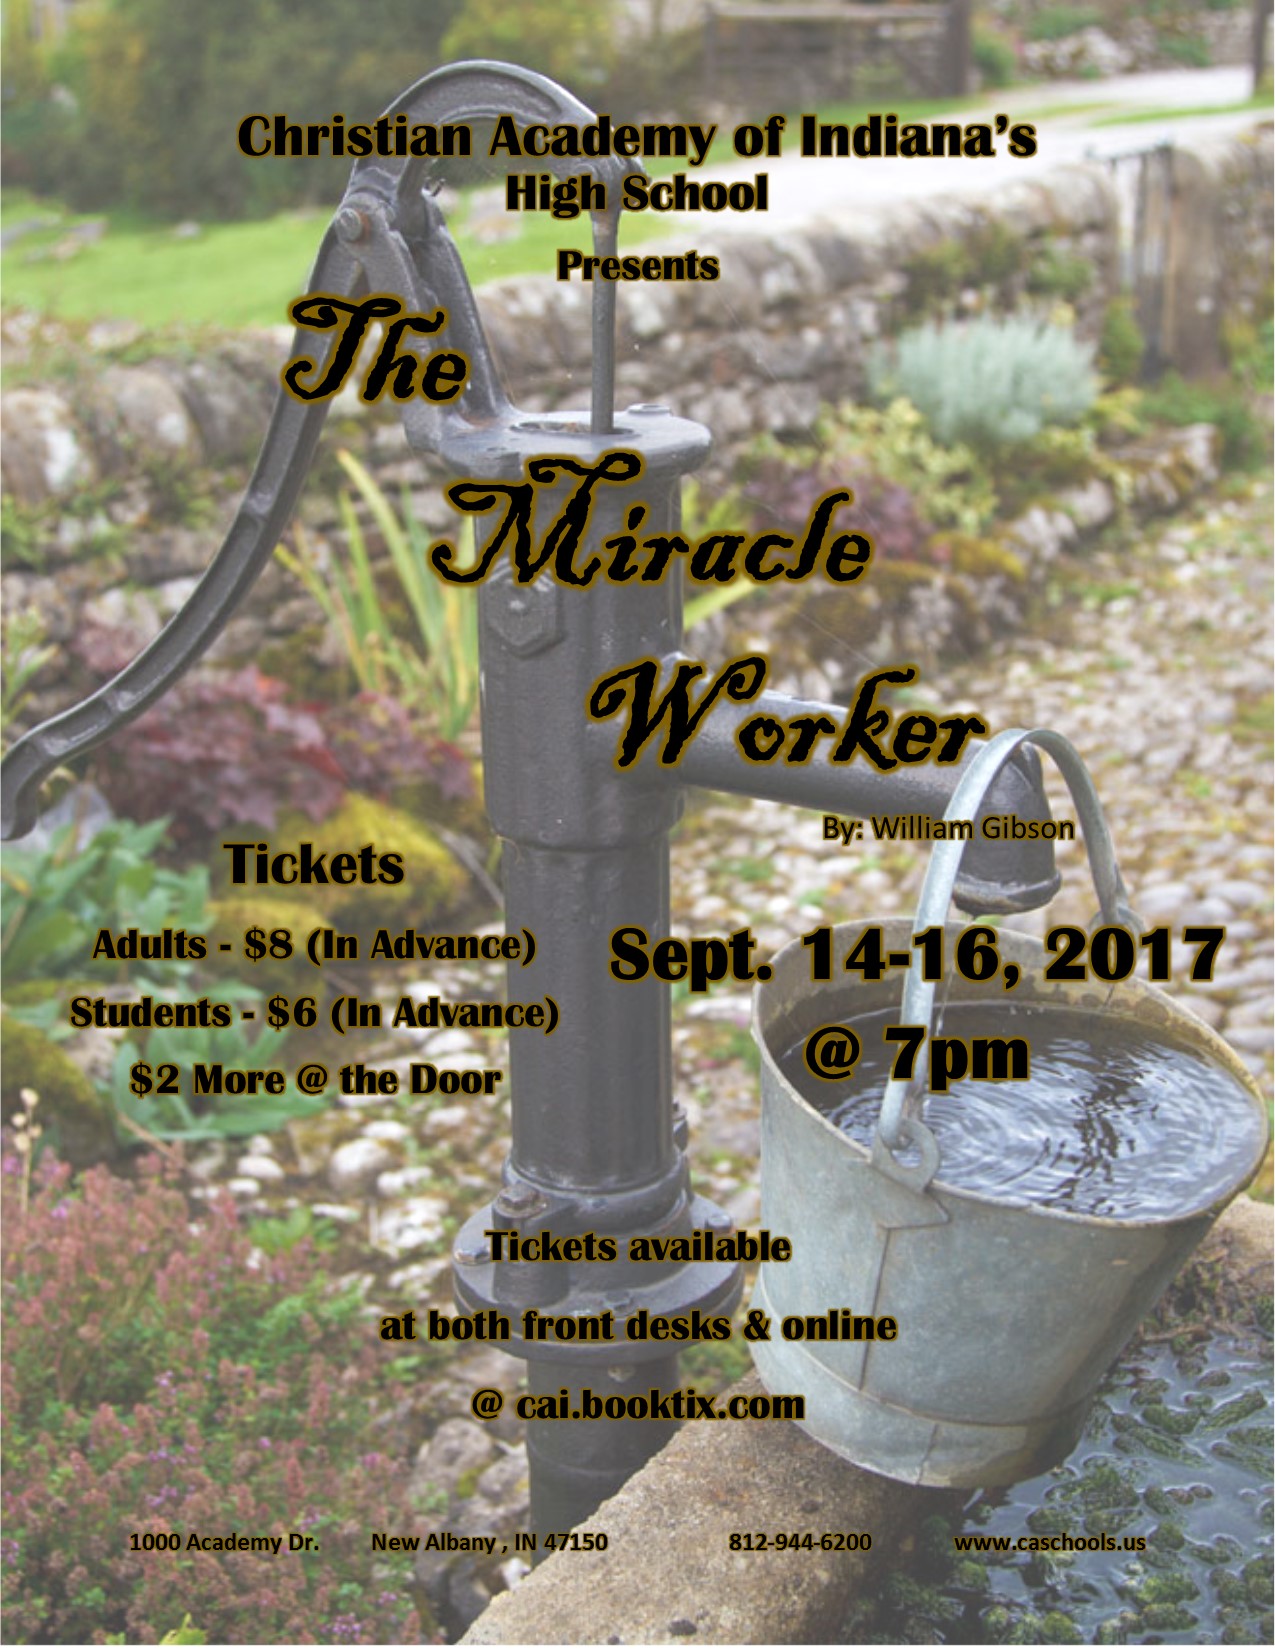 Christian Academy School System | Christian Academy of Indiana | Drama | The Miracle Worker | September 14-16, 2017